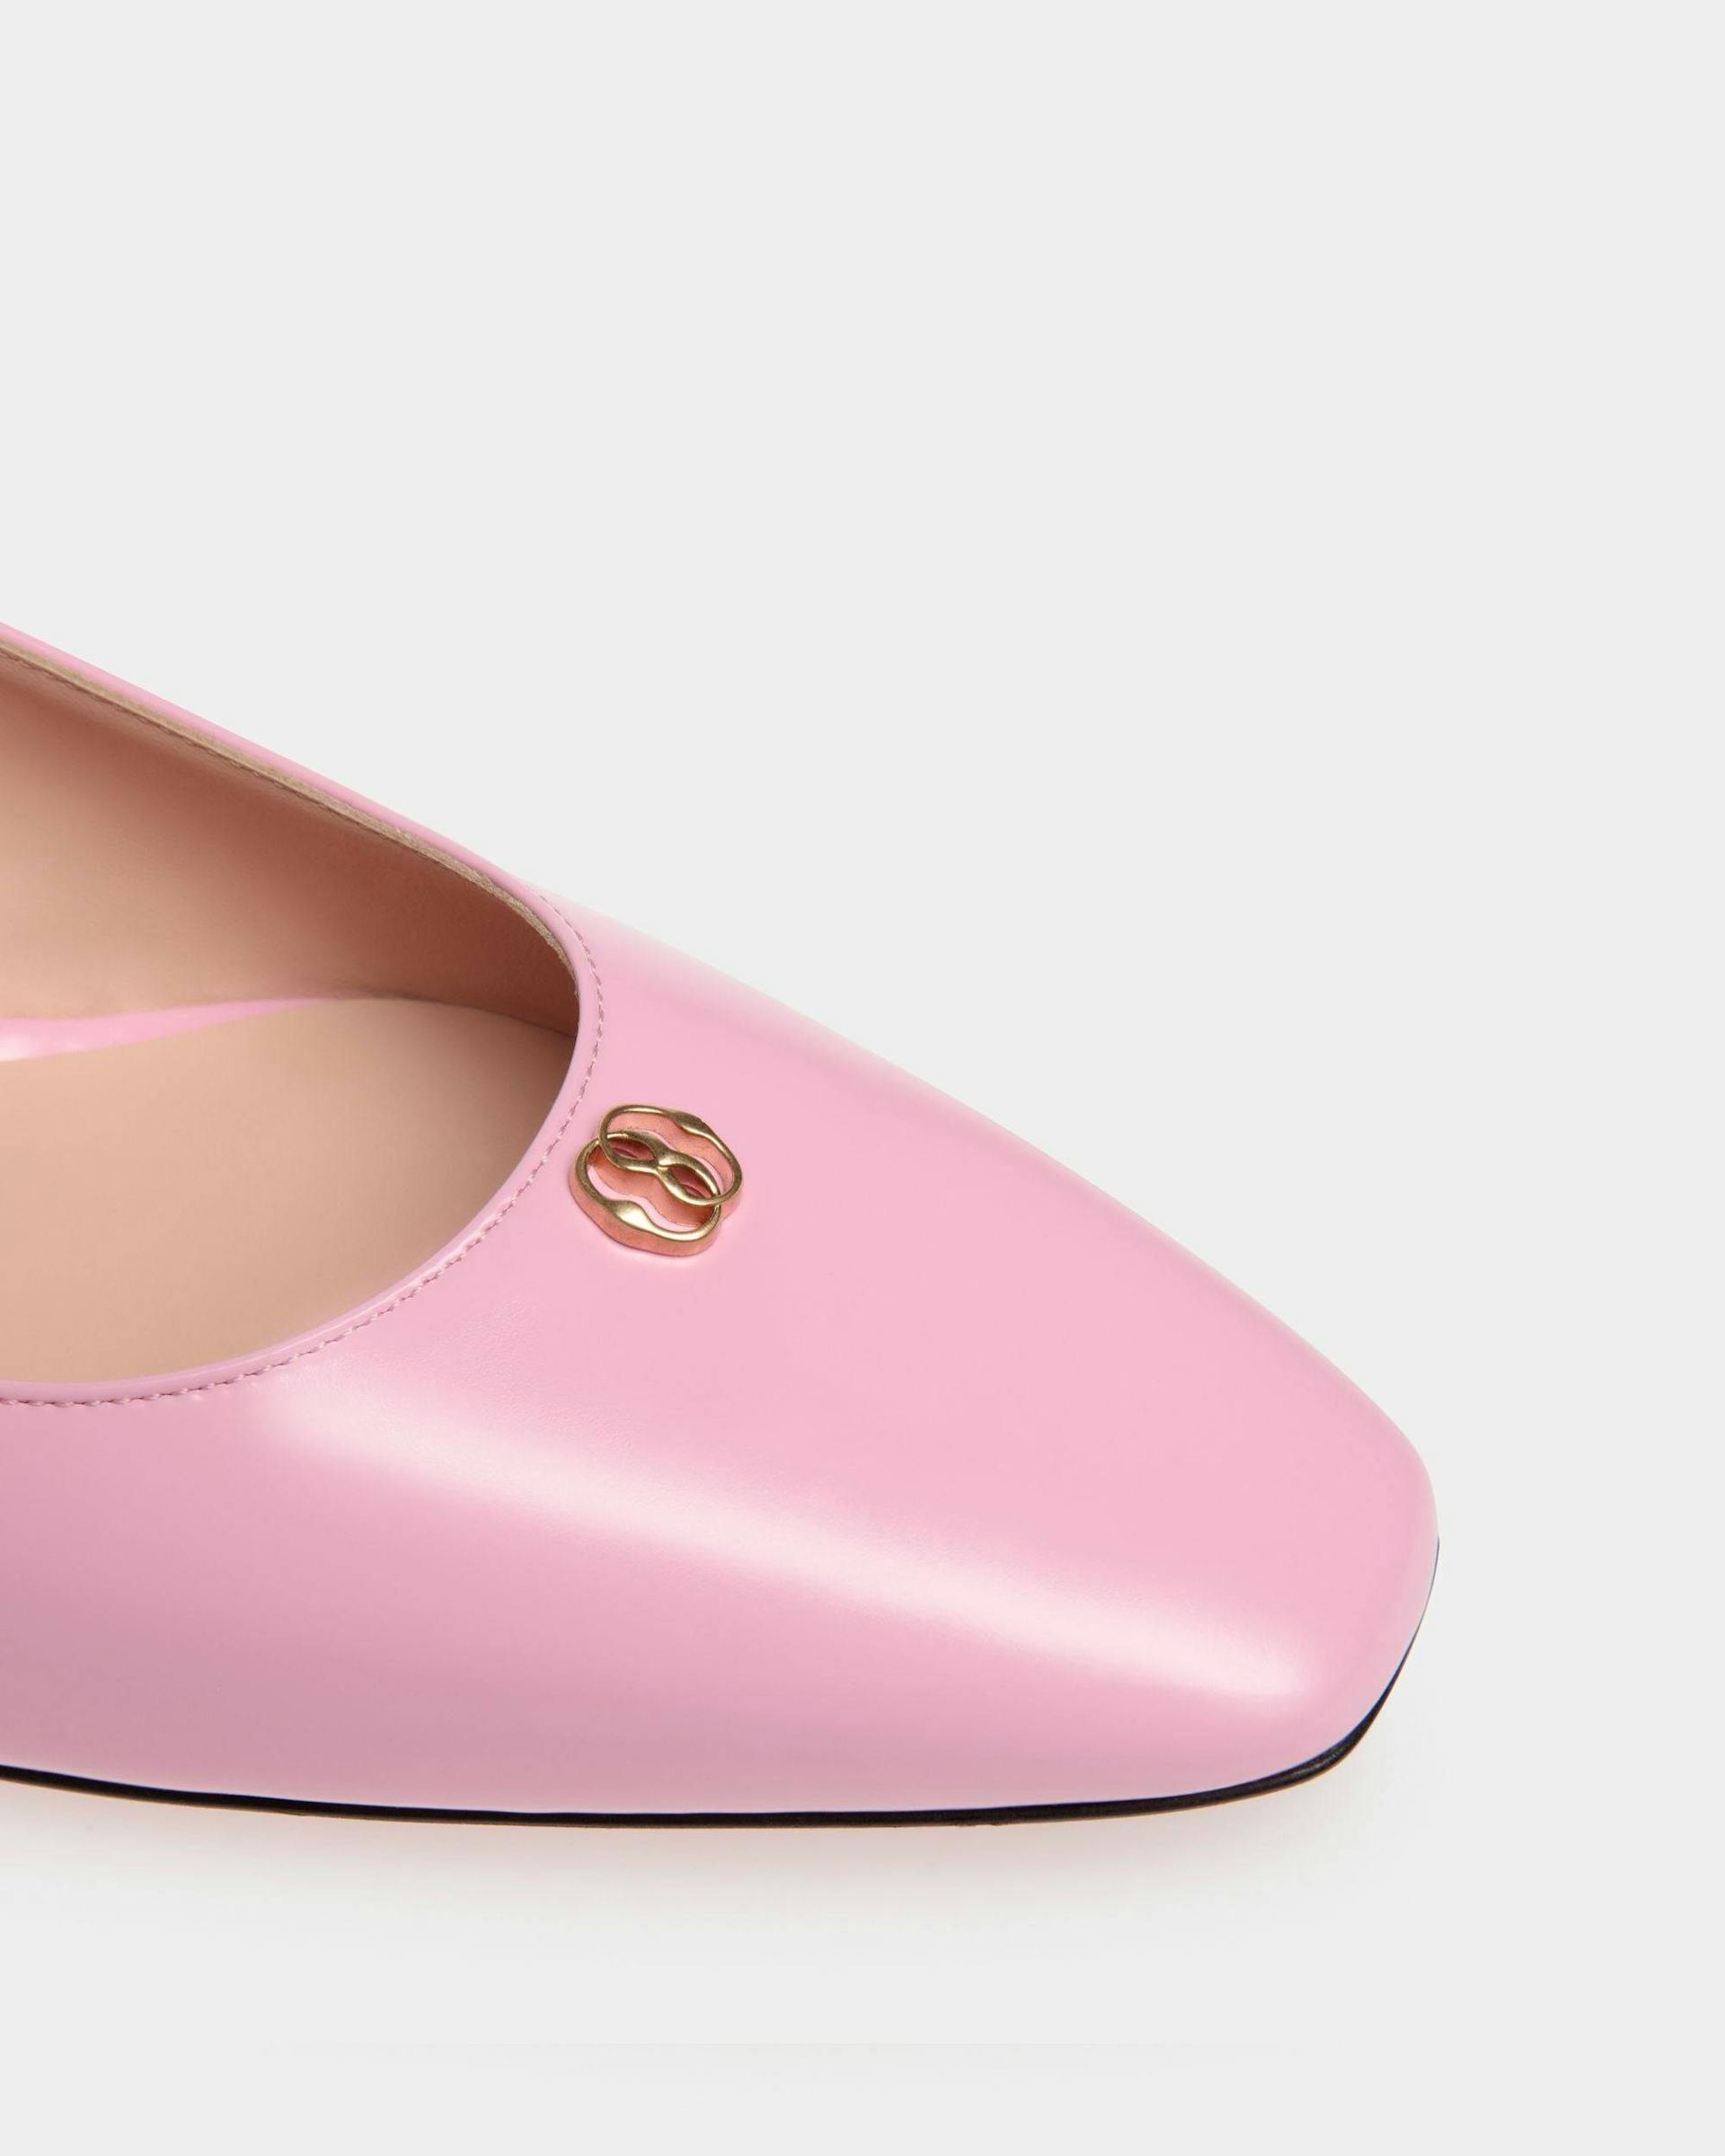 Women's Sylt Slingback Pump In Pink Leather | Bally | Still Life Detail